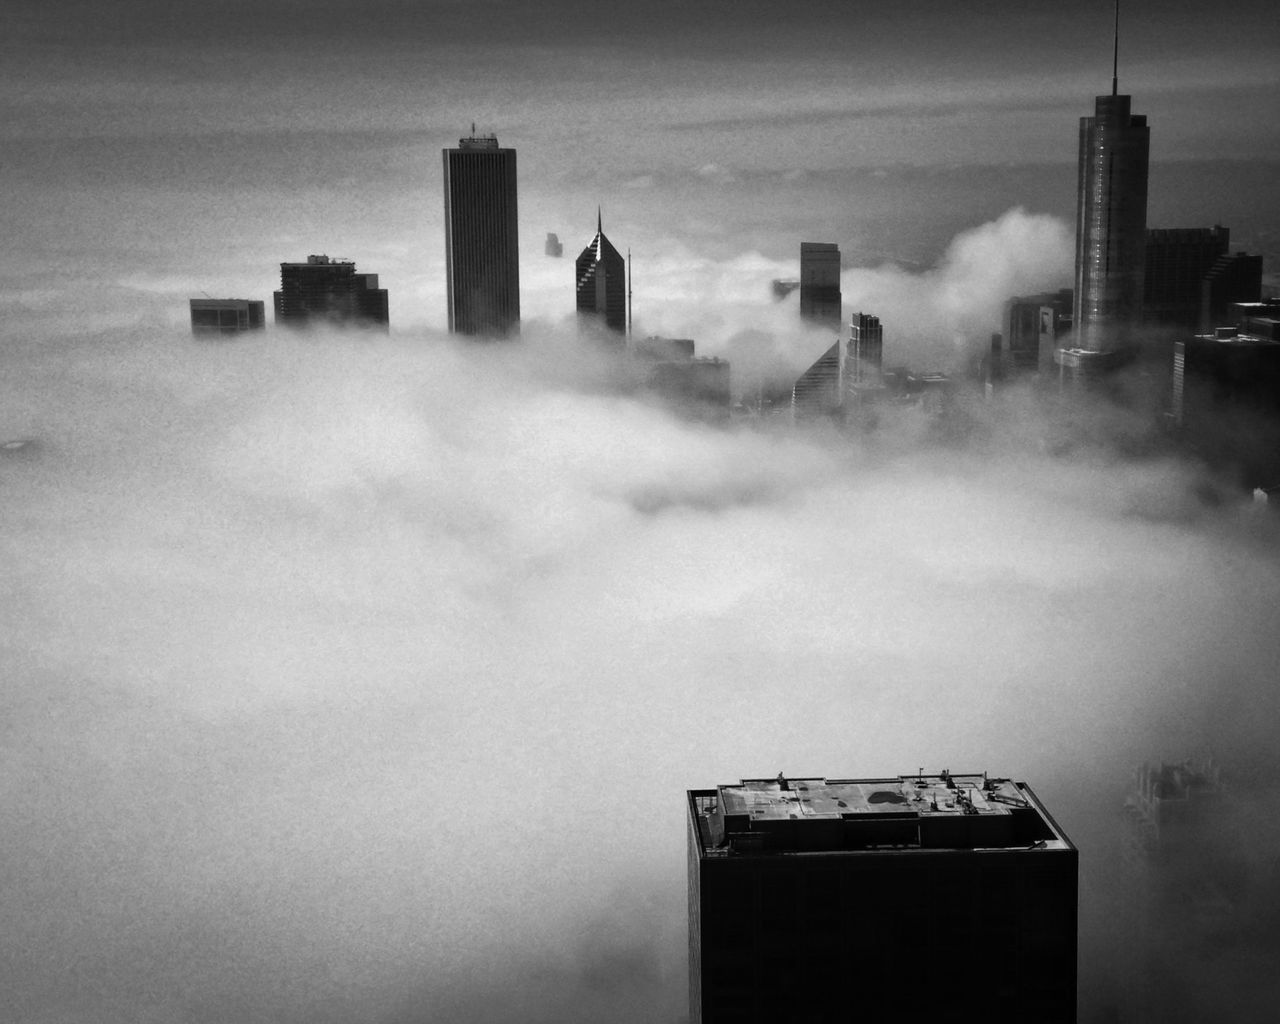 building exterior, architecture, built structure, skyscraper, city, sky, tall - high, tower, modern, cloud - sky, weather, office building, building, sunset, urban skyline, no people, smoke stack, outdoors, dusk, fog